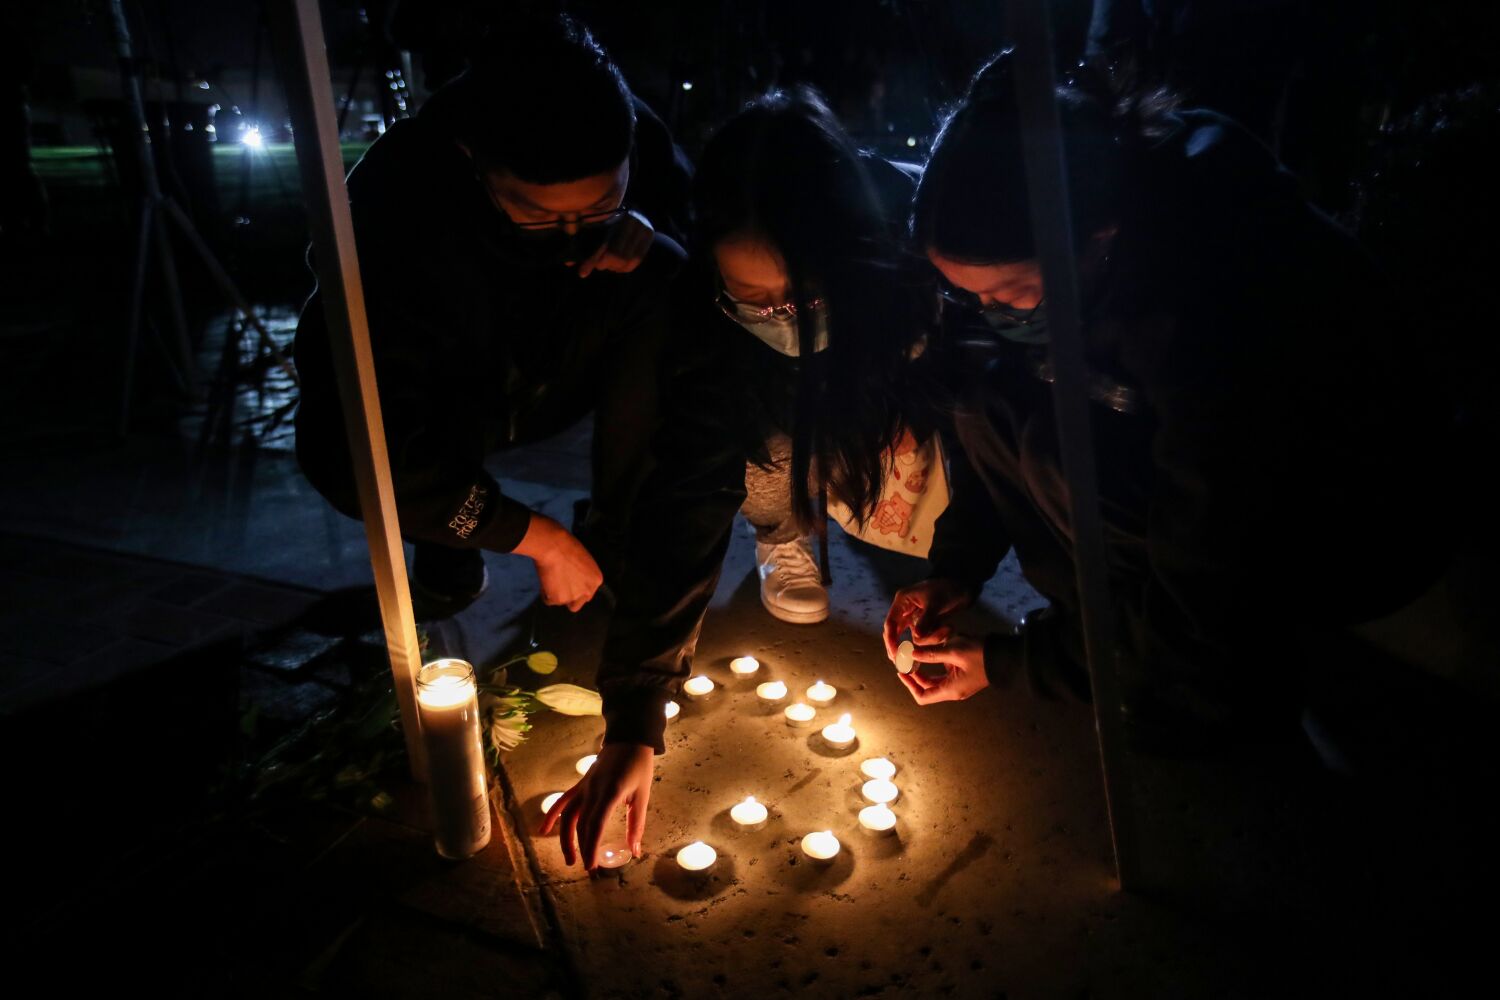 California mass shootings force grieving Asian Americans to ask painful questions